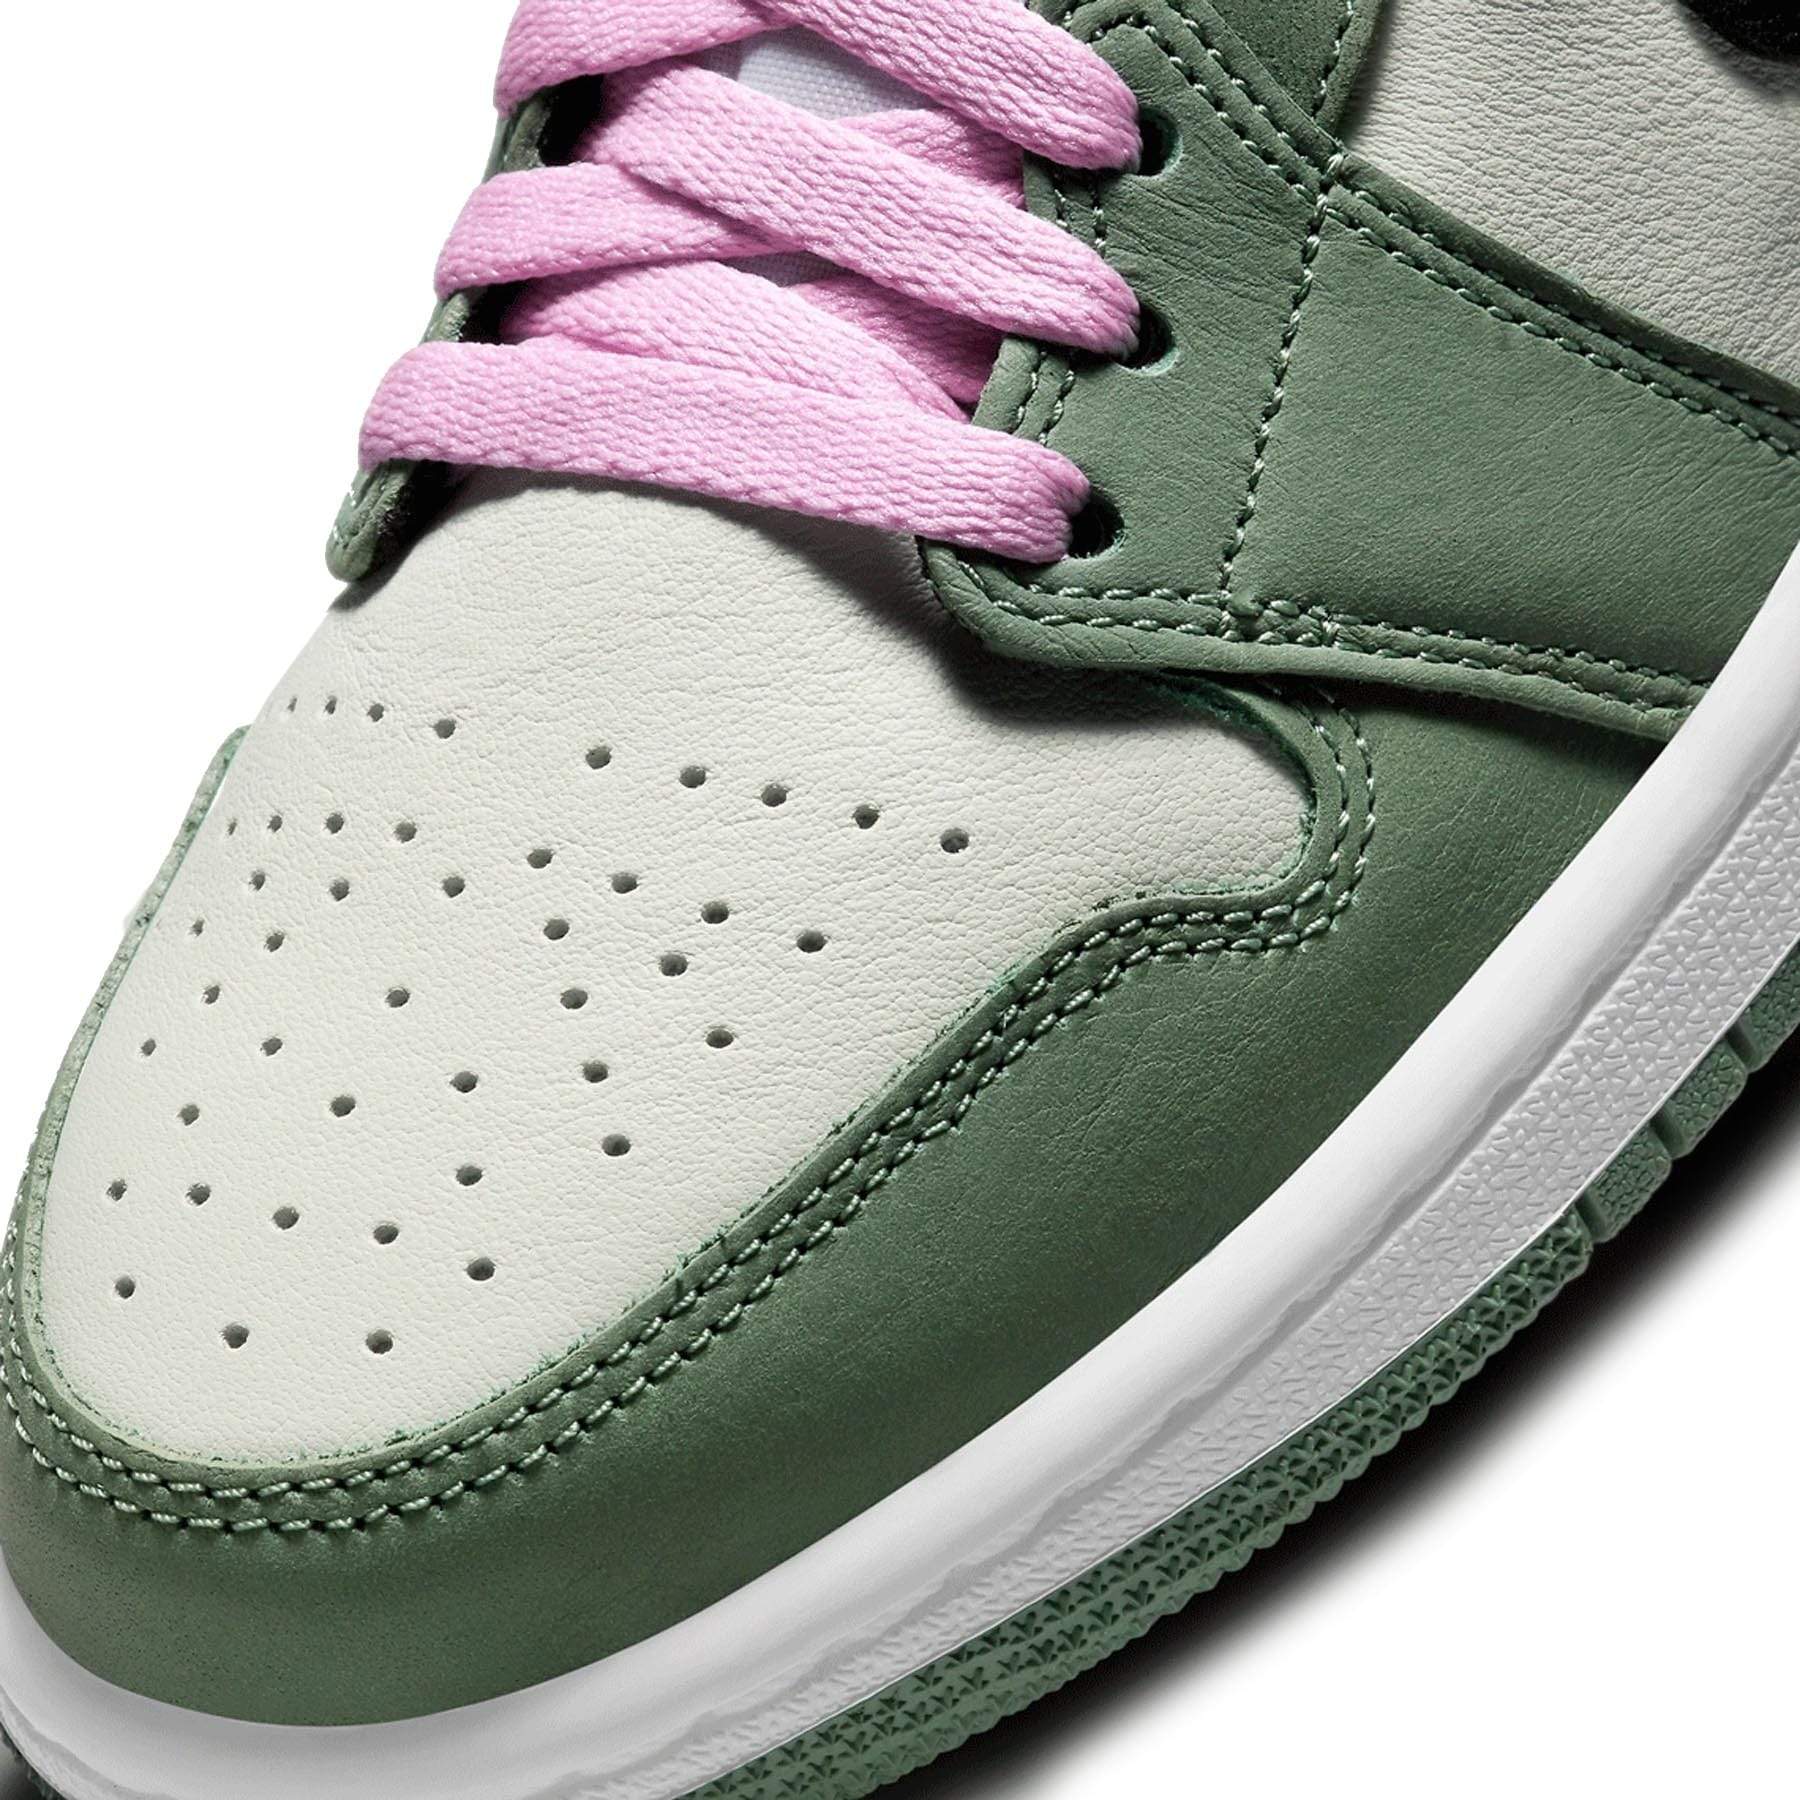 jordan 1 green with pink laces